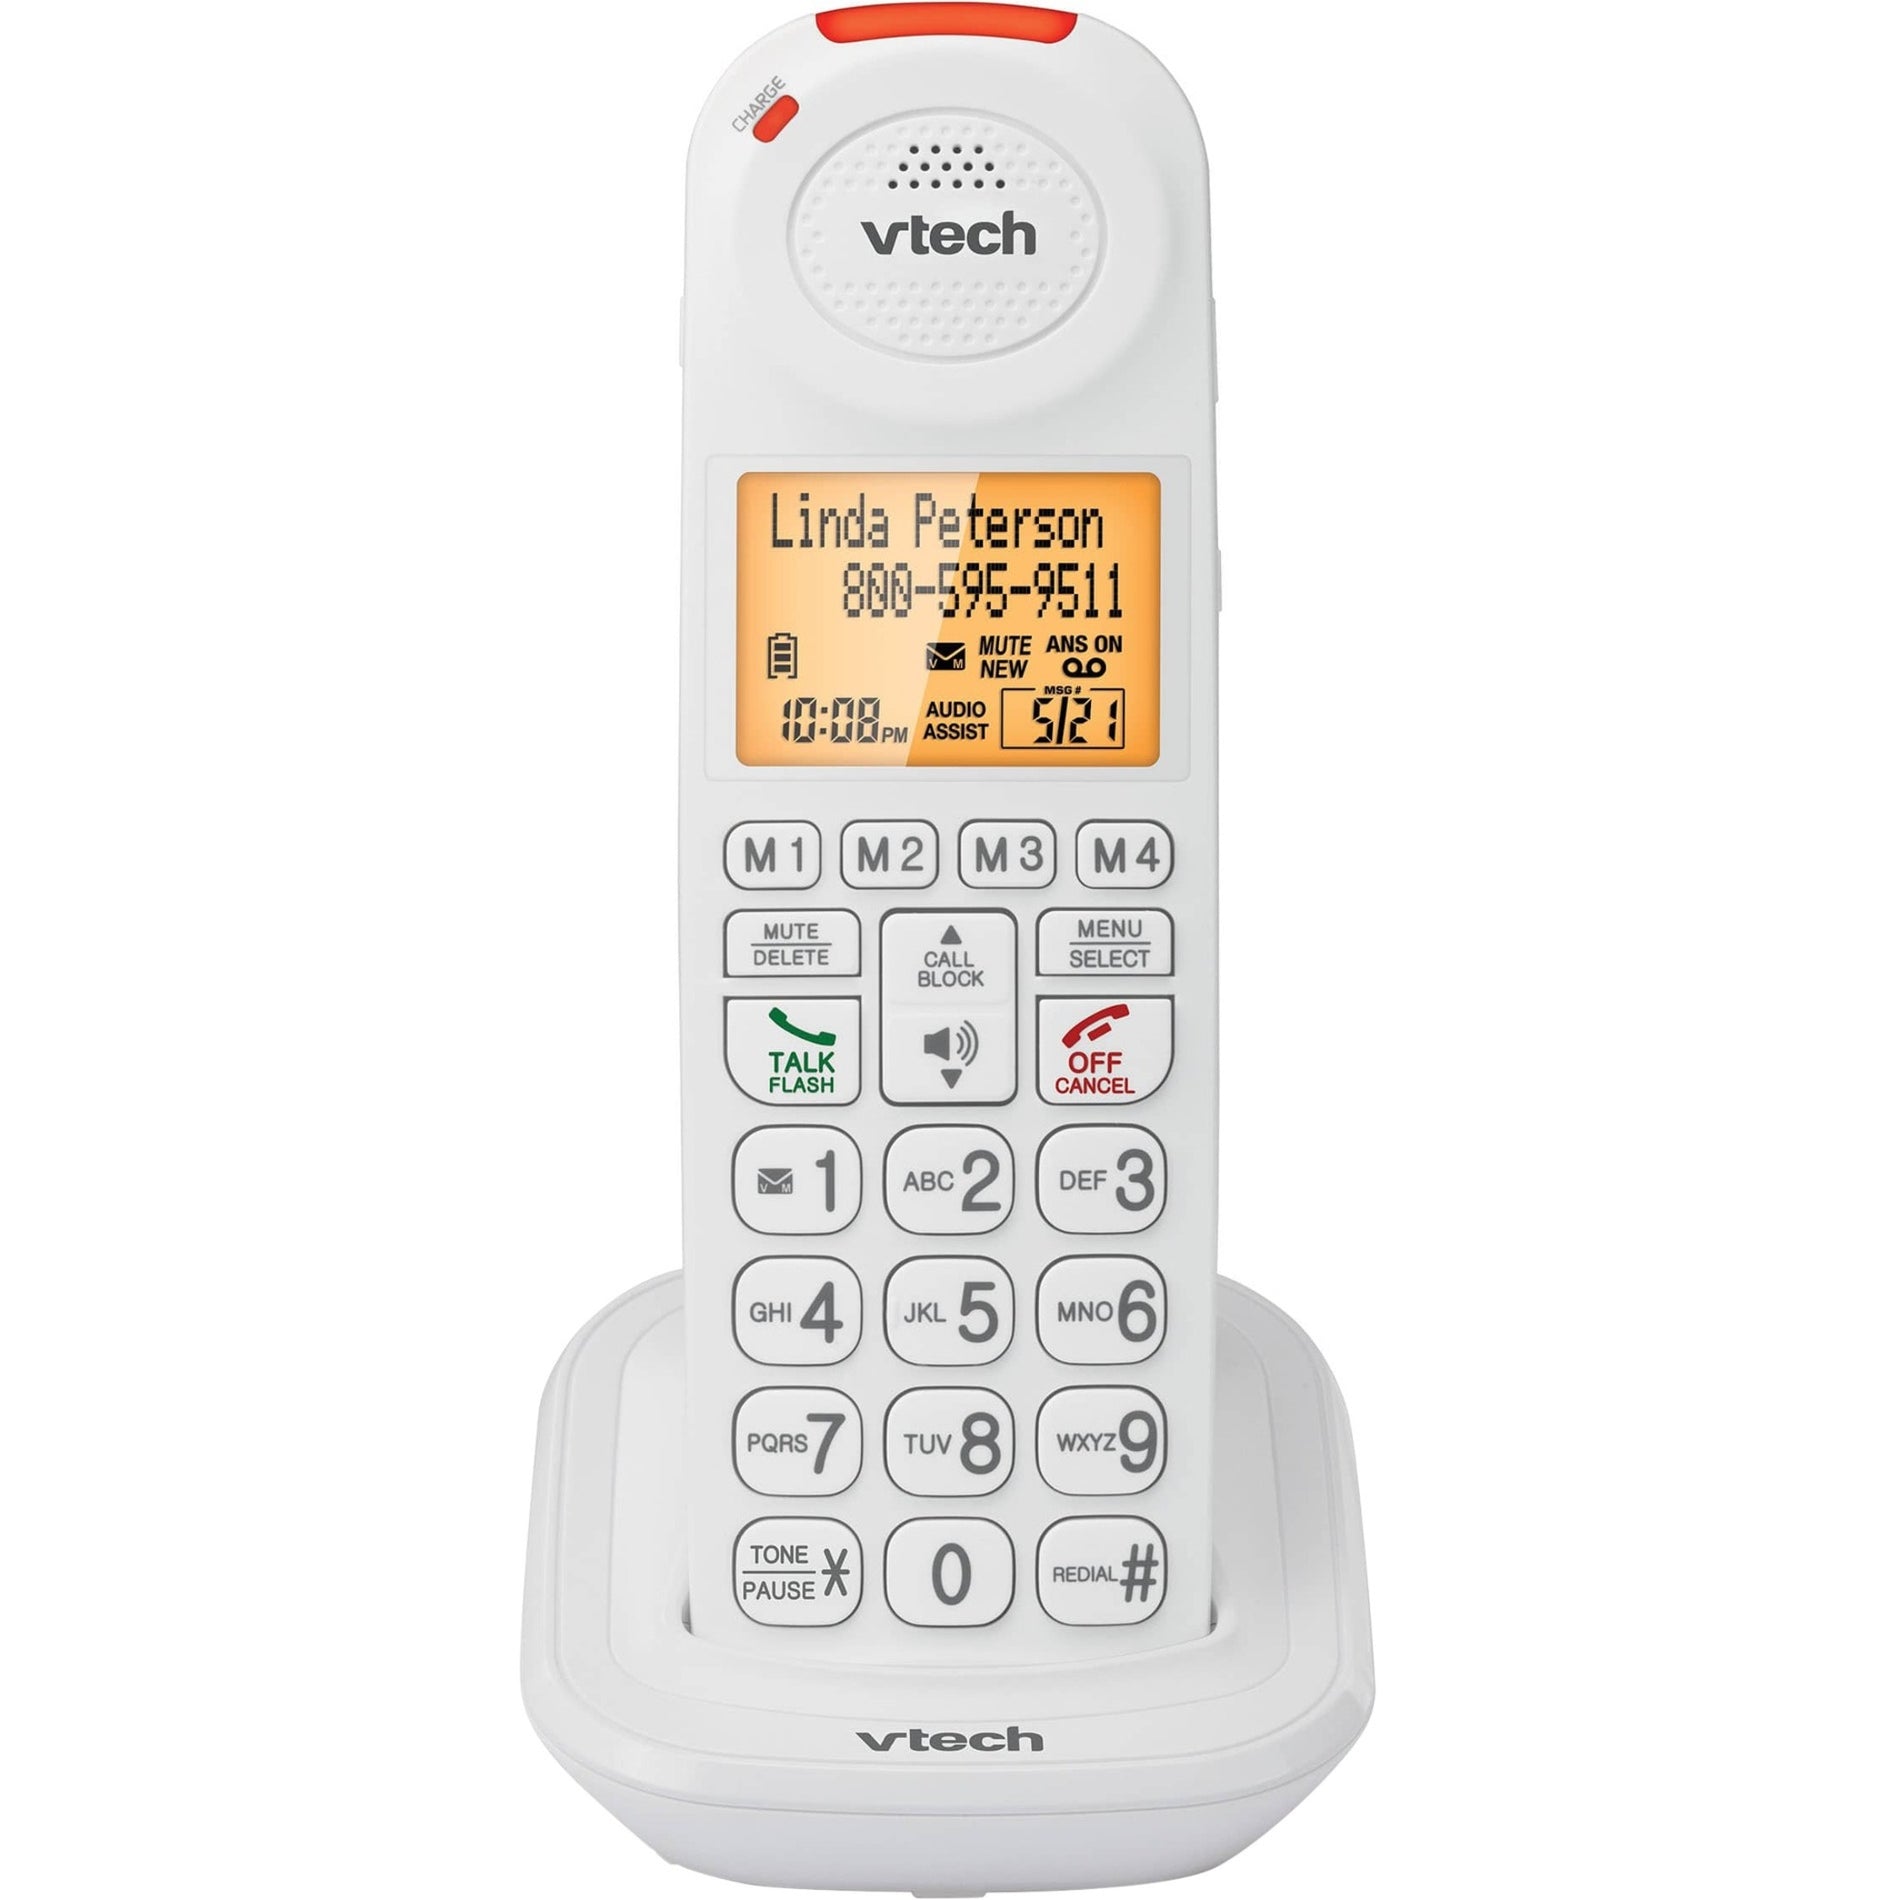 VTech SN5107 Amplified Big Button Accessory Handset for SN5127 or SN5147 Series Phones, Voice Mail, Mute, Volume Control